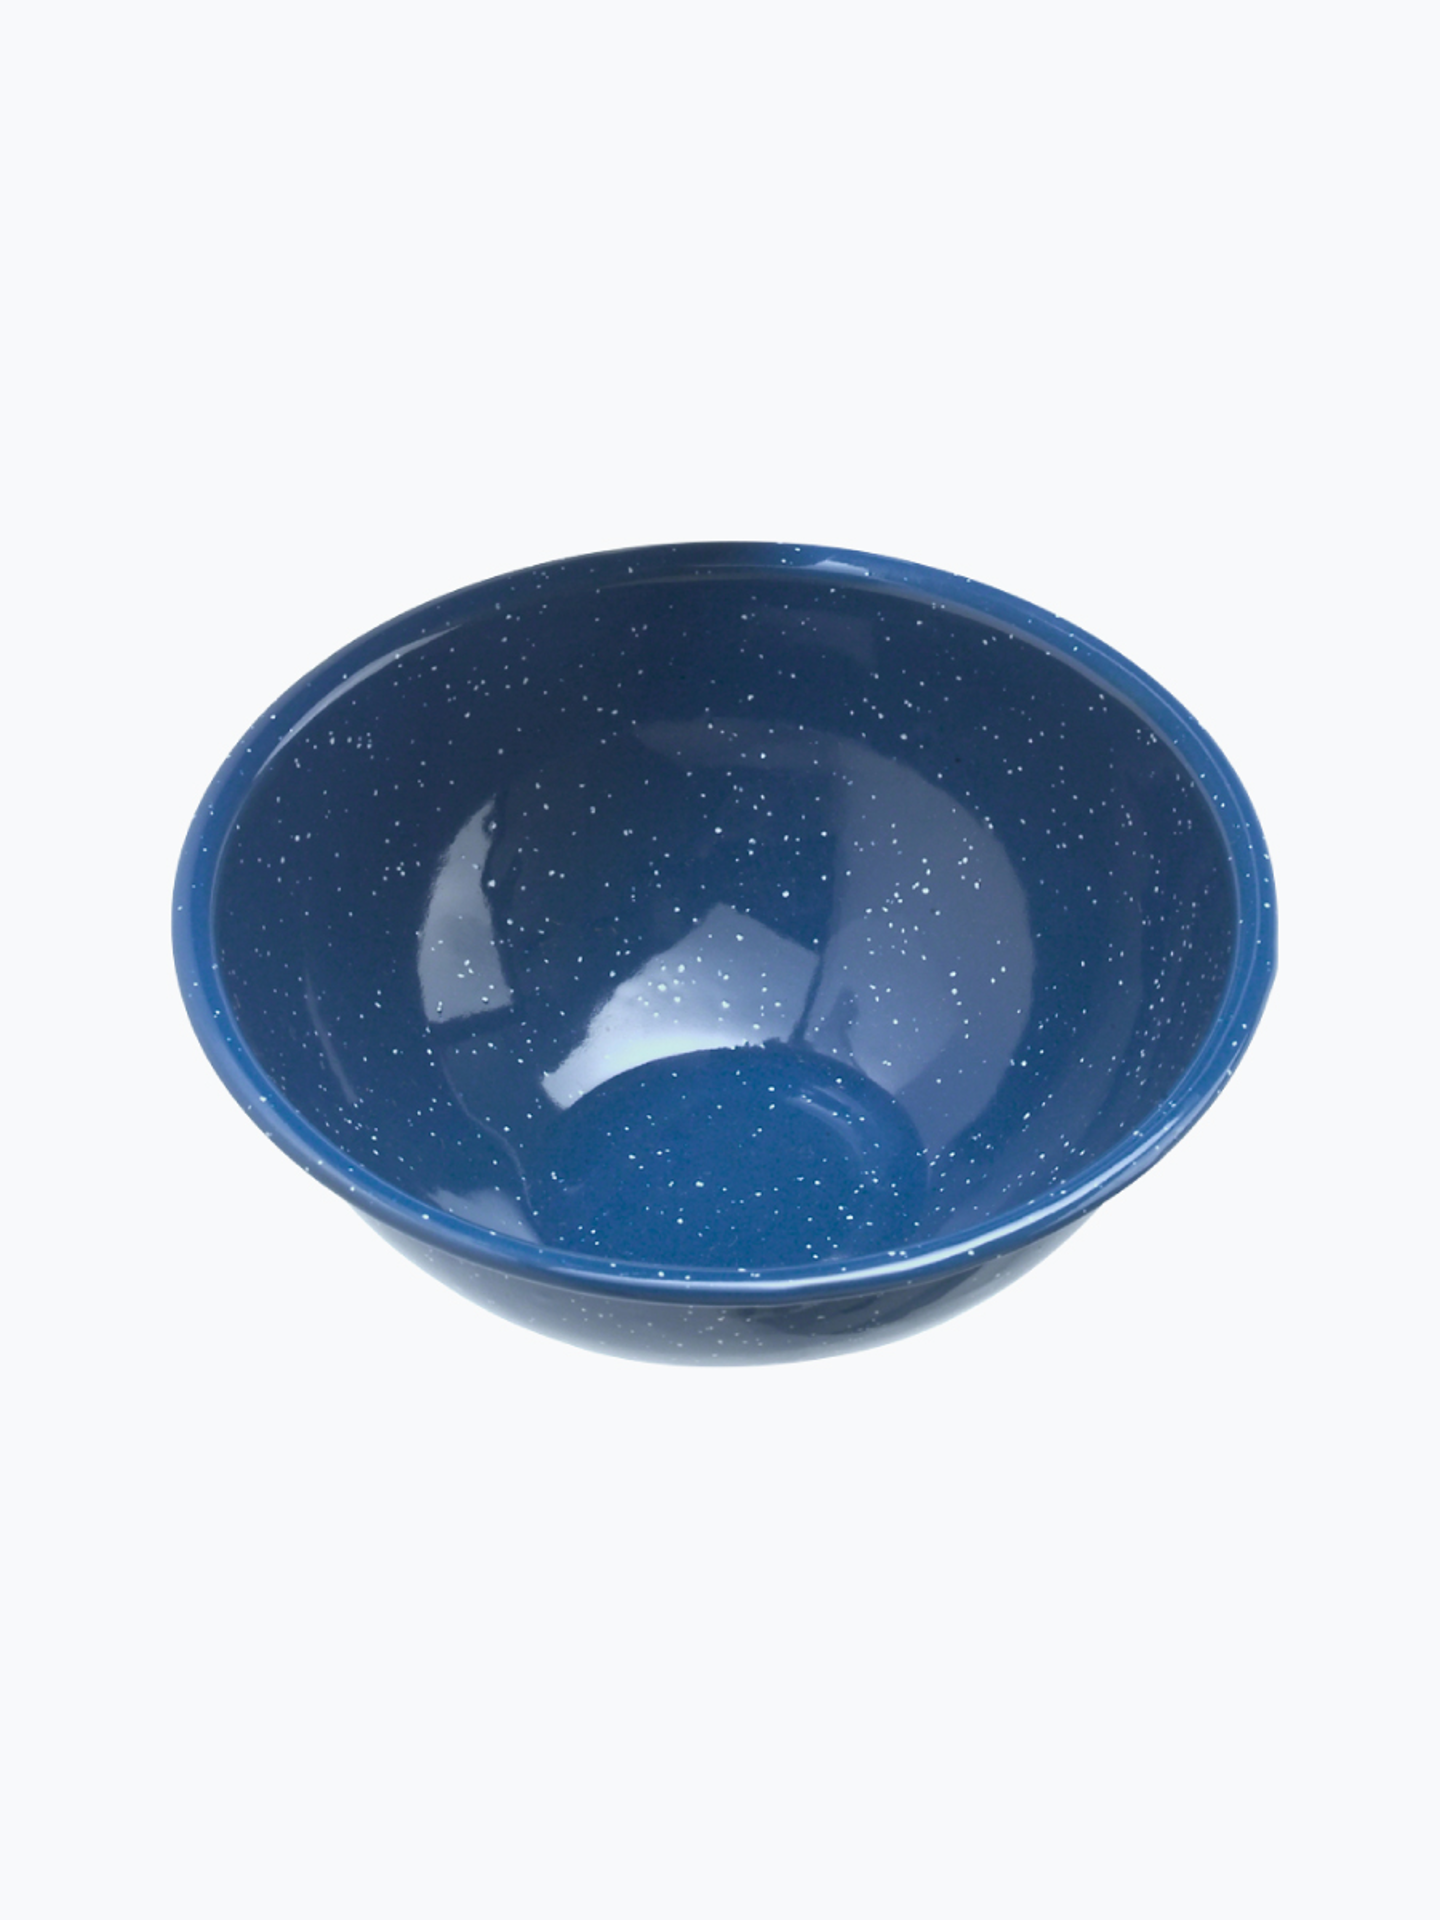 [GSI Outdoors] 6-INCH MIXING BOWL (BLUE)